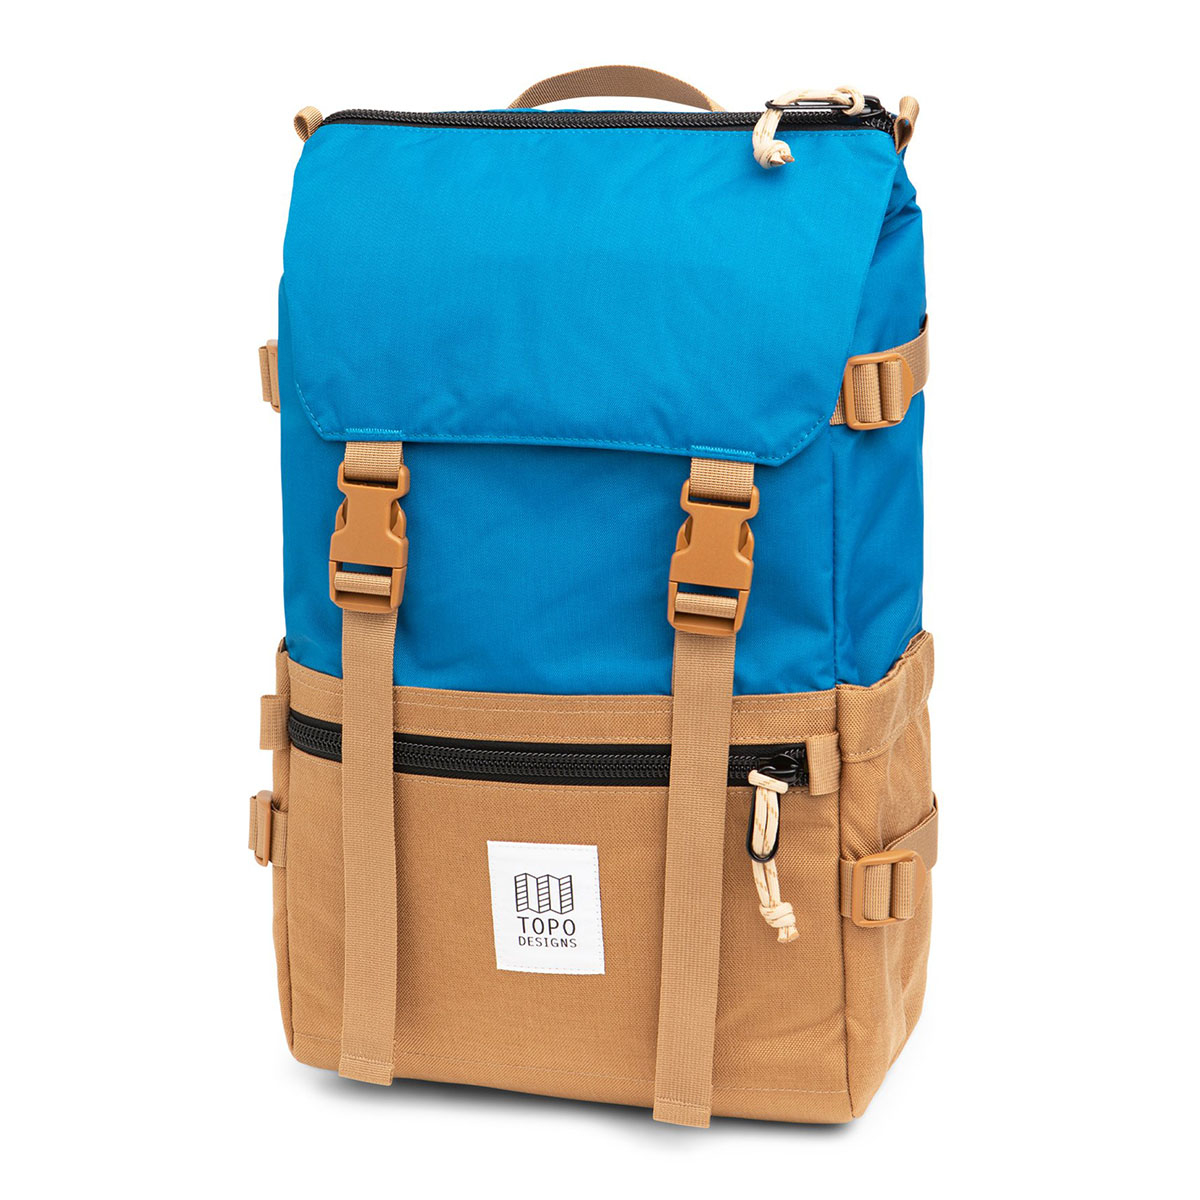 Topo Designs Rover Pack Classic Blue/Khaki, timeless backpack with great functionalities